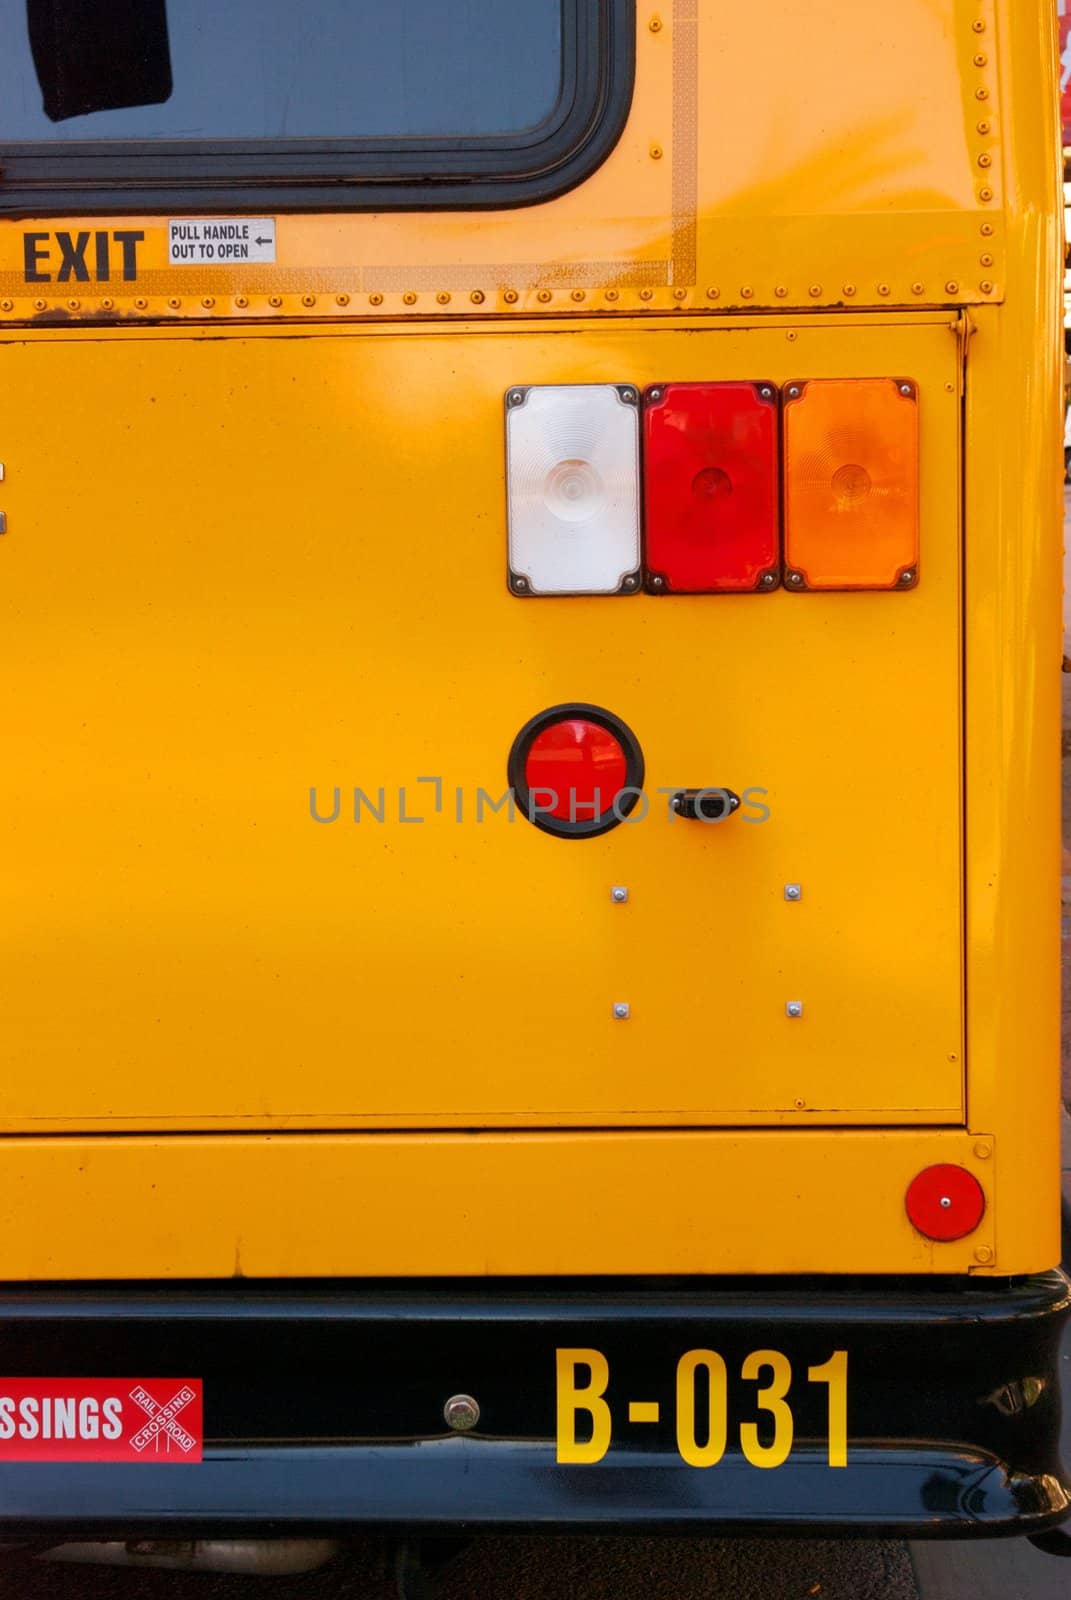 Yellow School Bus Bumper and Tail LIghts by pixelsnap